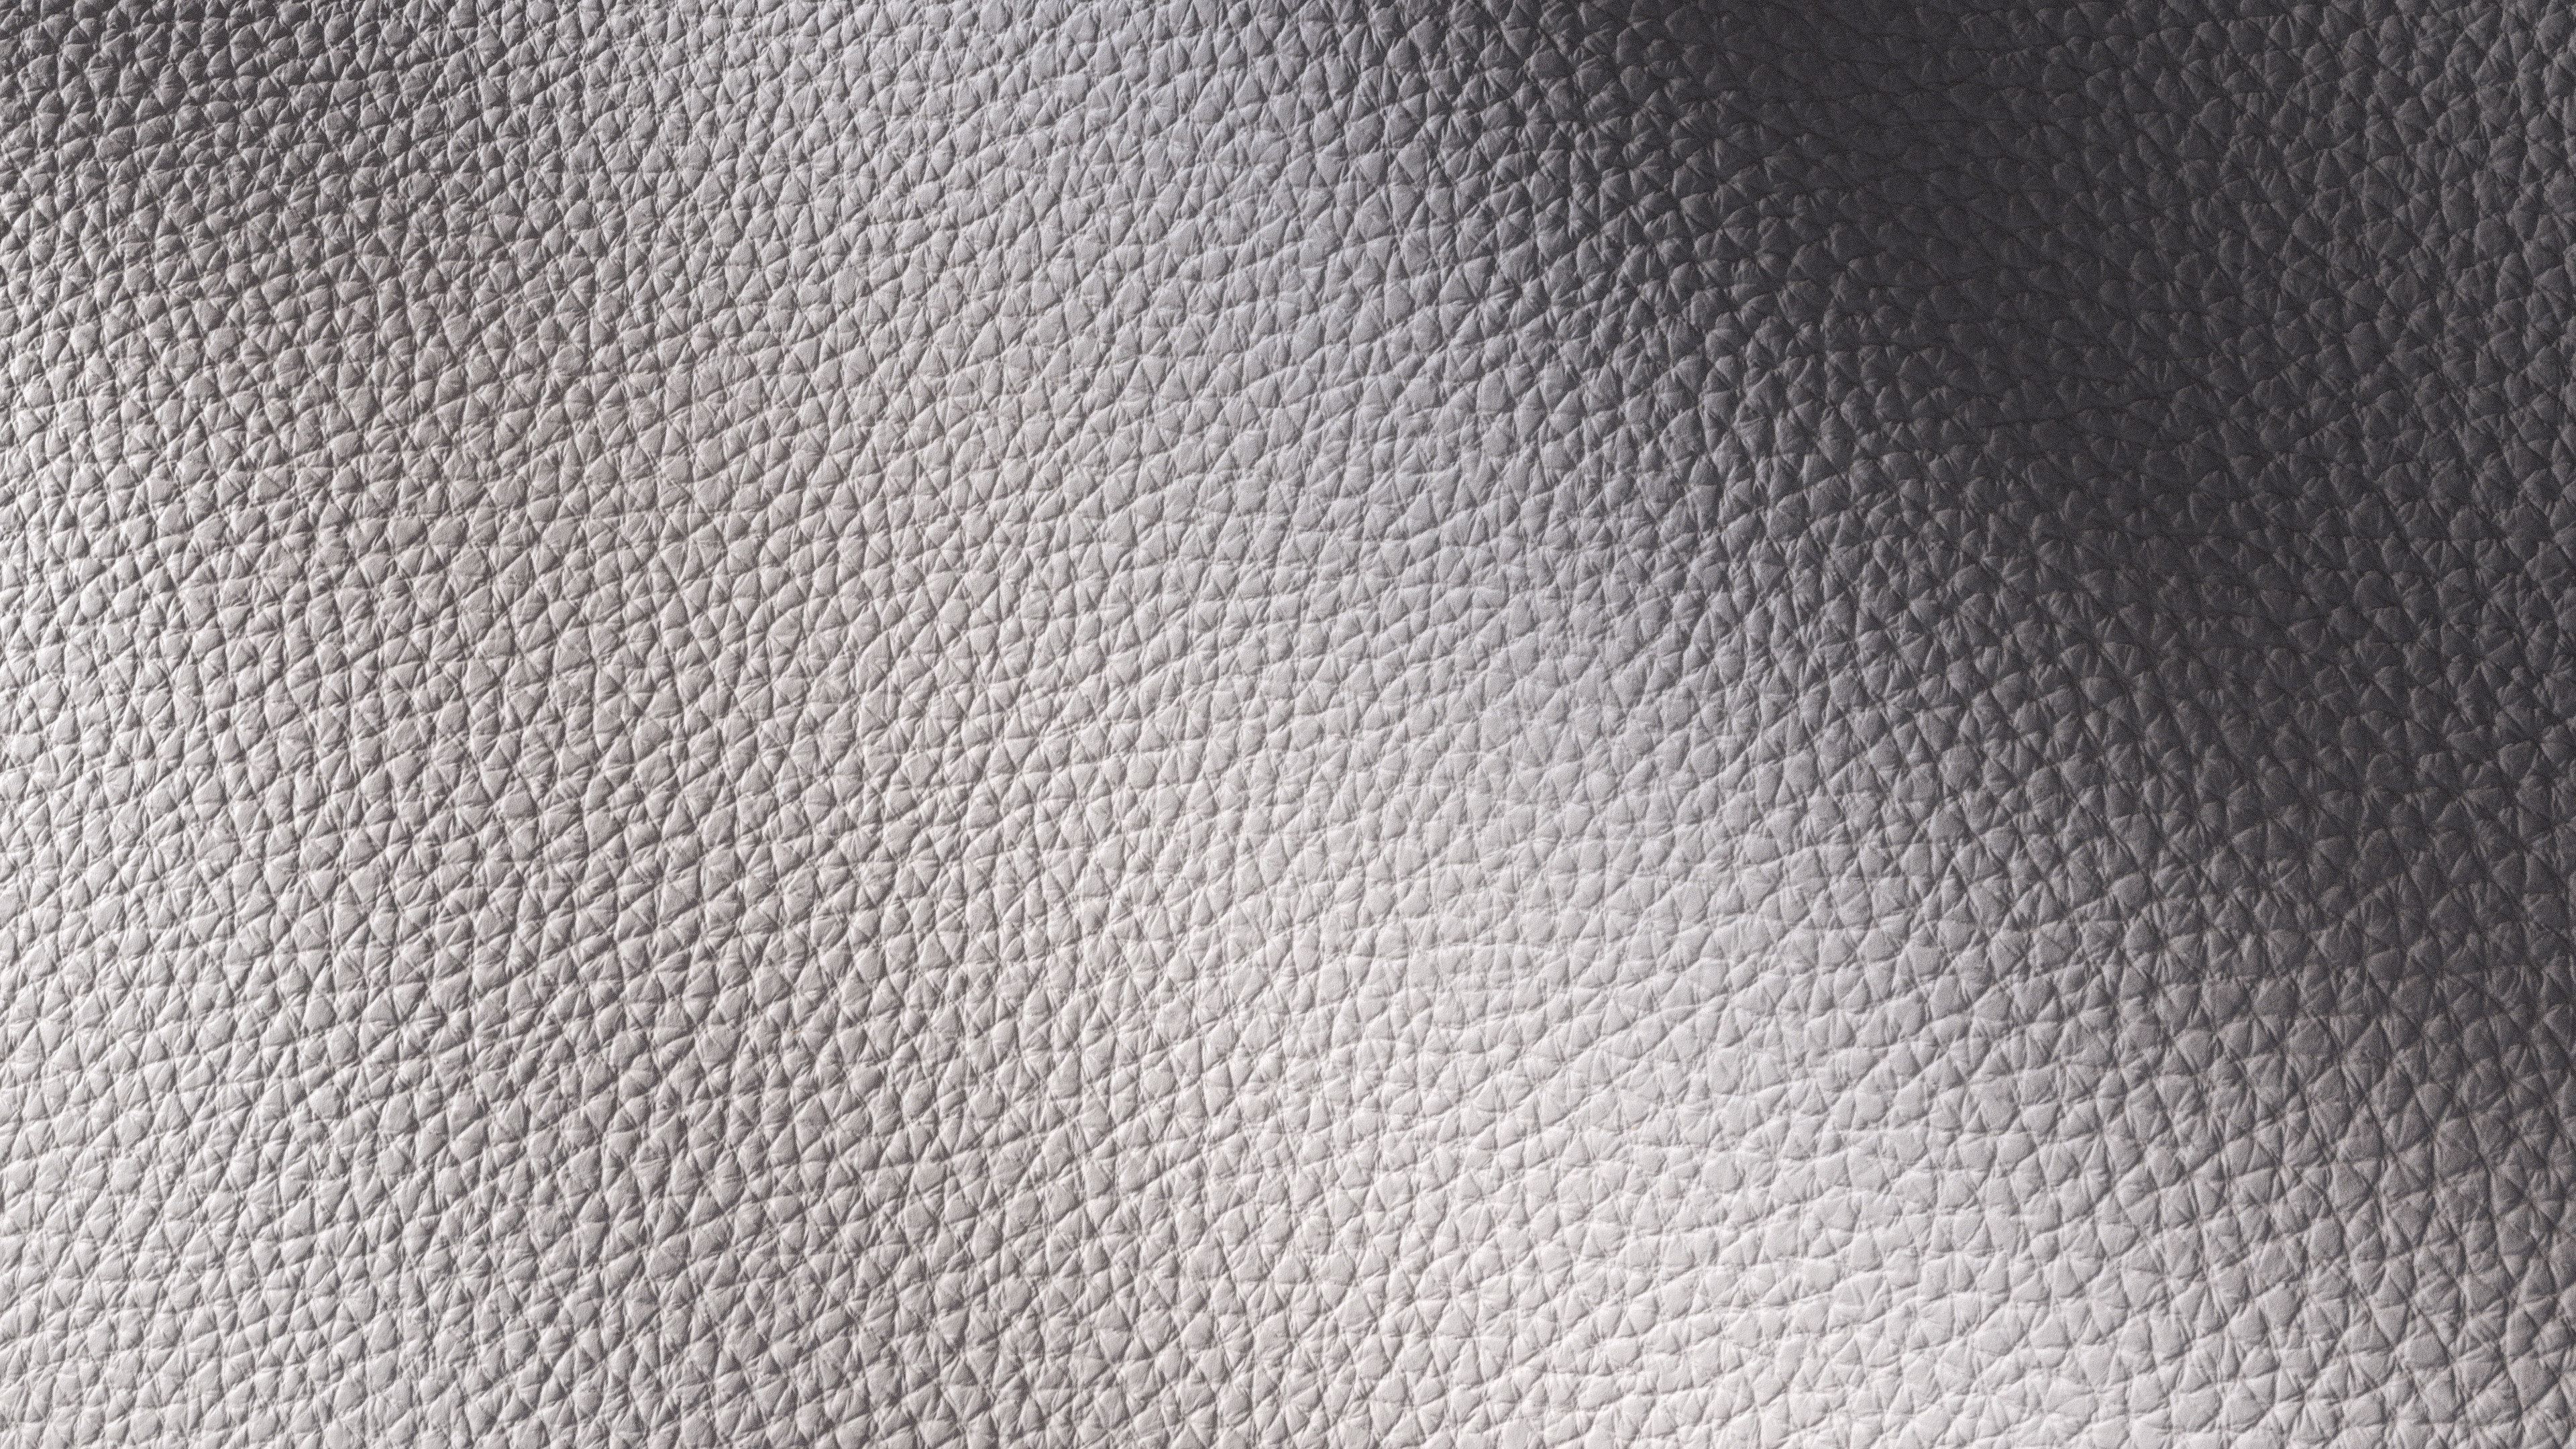 3d Scanned Leather Material 012x012 Meters